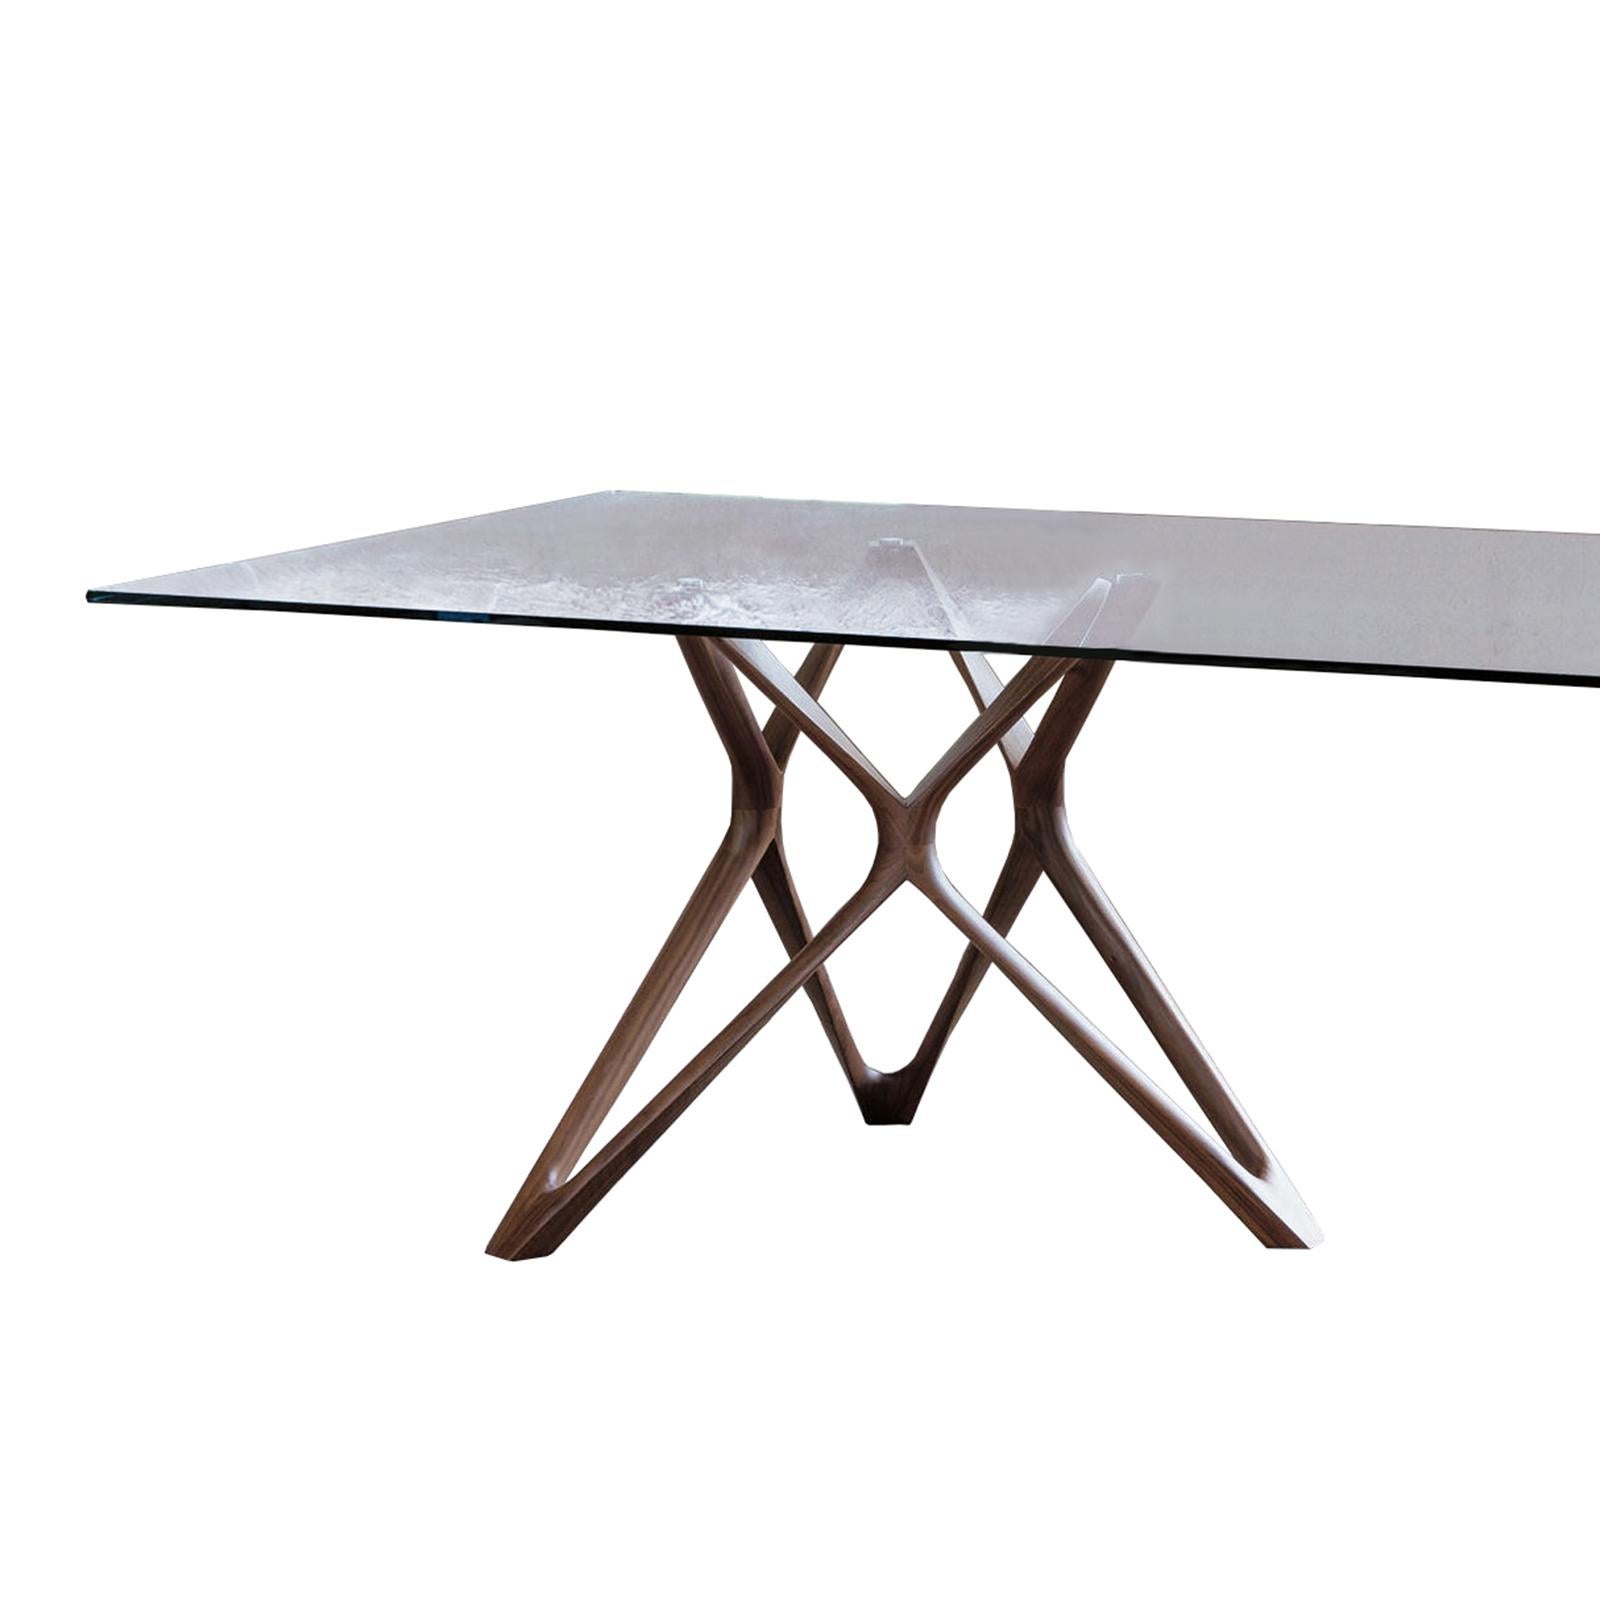 Dining table Giulia with 2 bases in solid walnut wood,
Diameter 77cm per base, handcrafted wood.
With tempered clear glass top (12mm thickness).
Available on request in:
L 260 x D 120 x H 75cm, price: 16900,00€.
L 300 x D 130 x H 75cm, price: